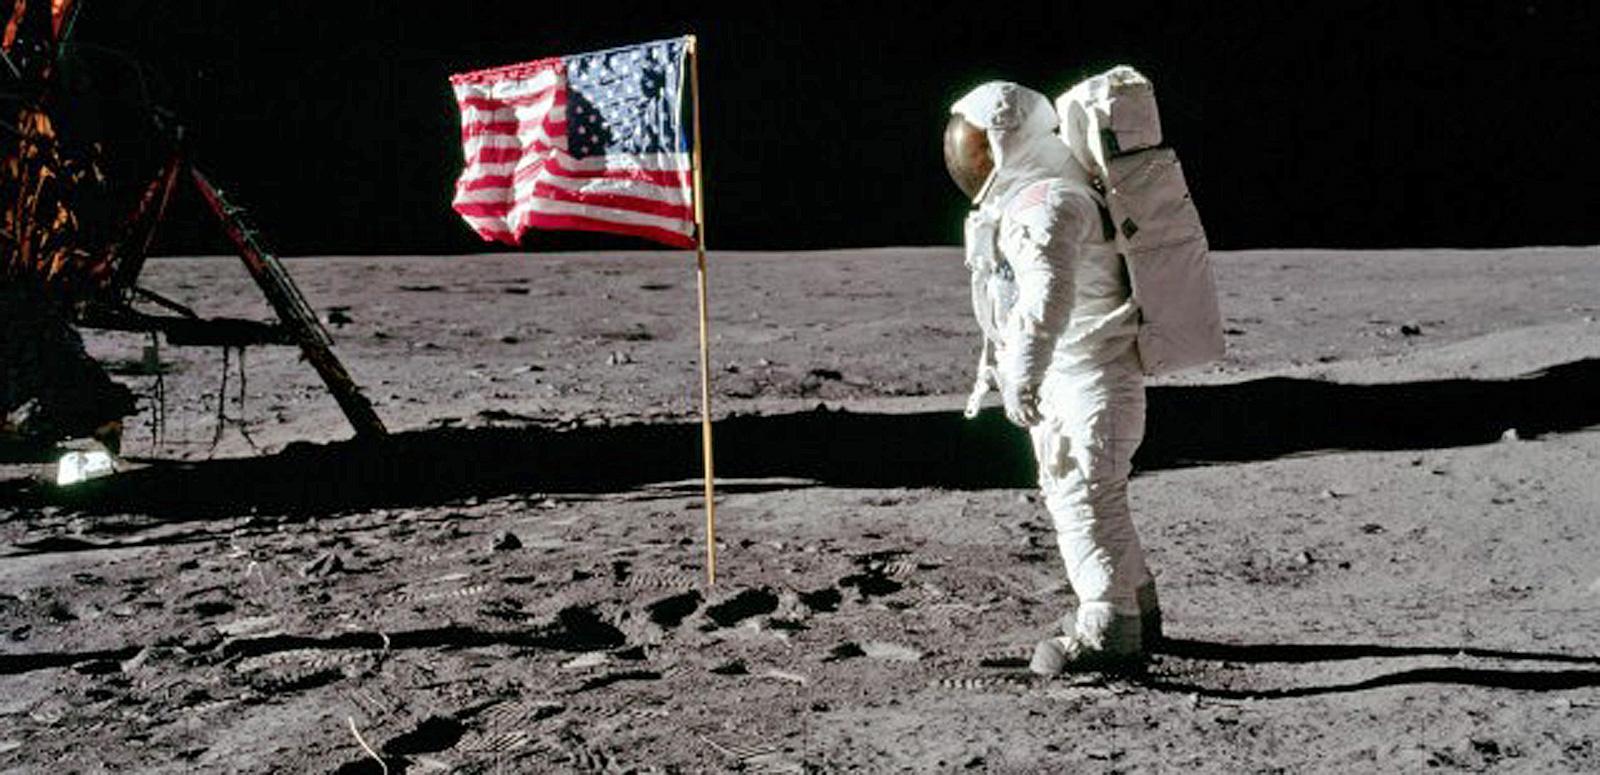 Astronaut on the moon standing near the American flag